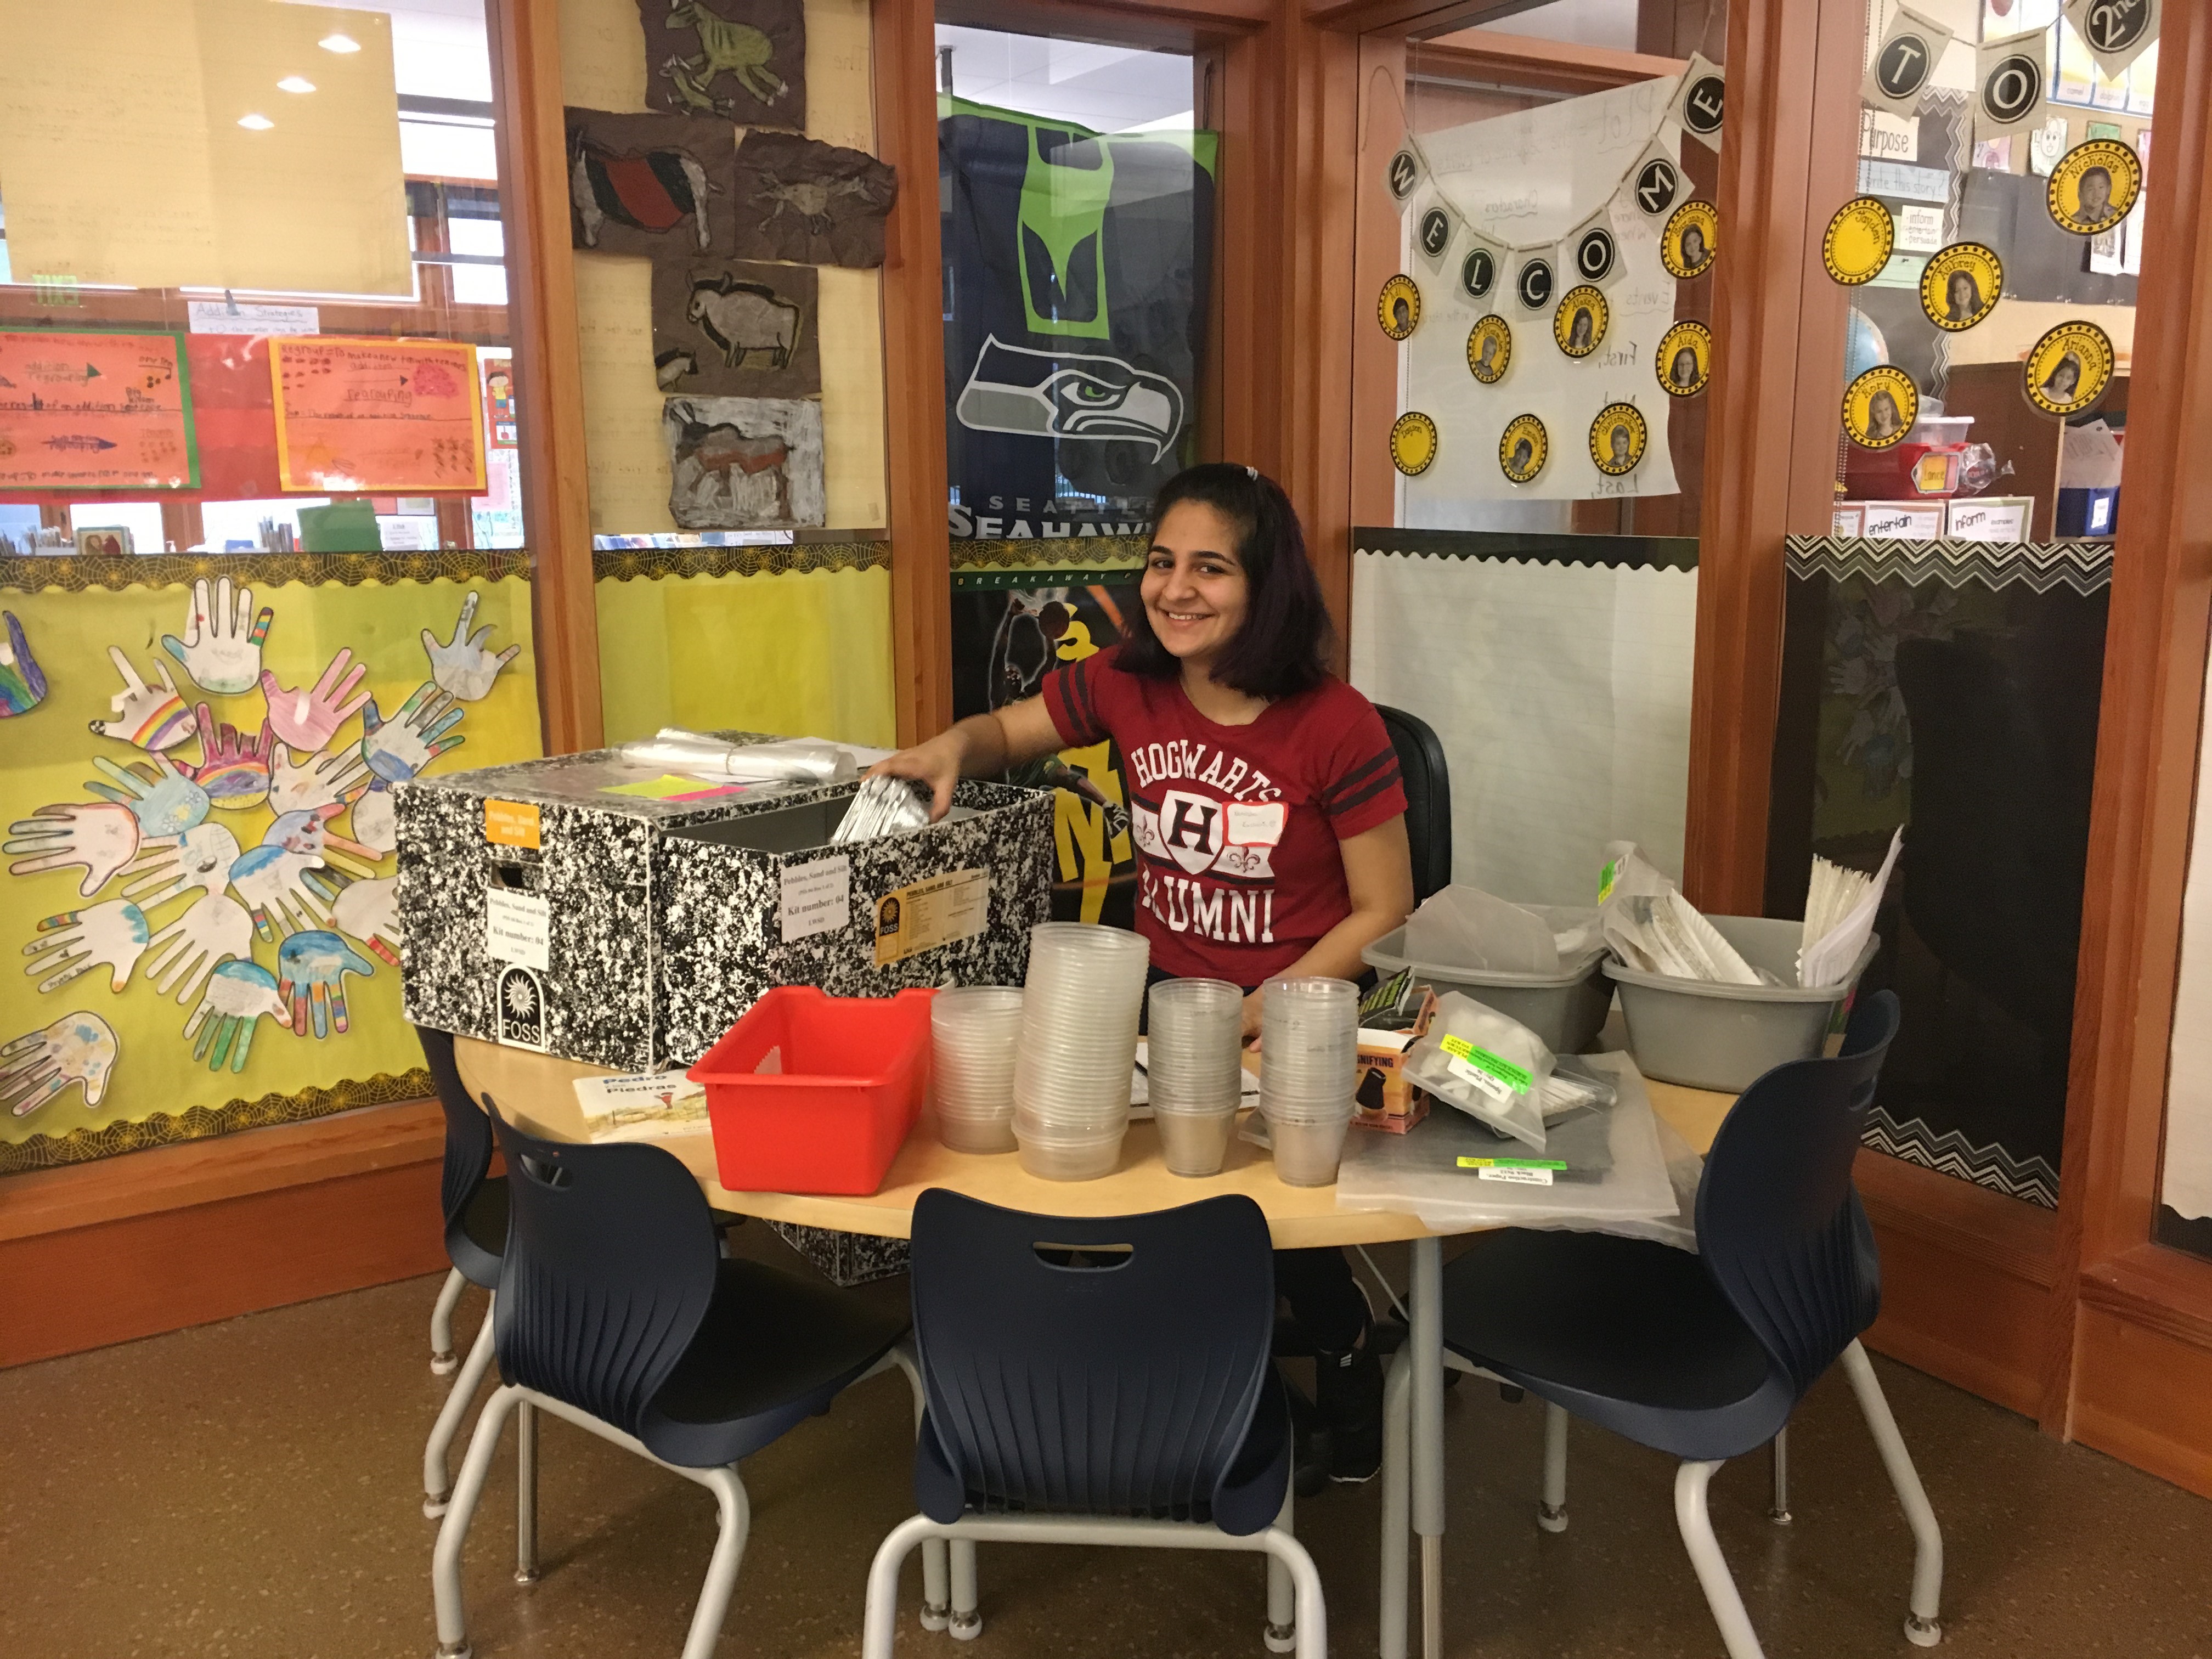 A student prepares science kits for a class.